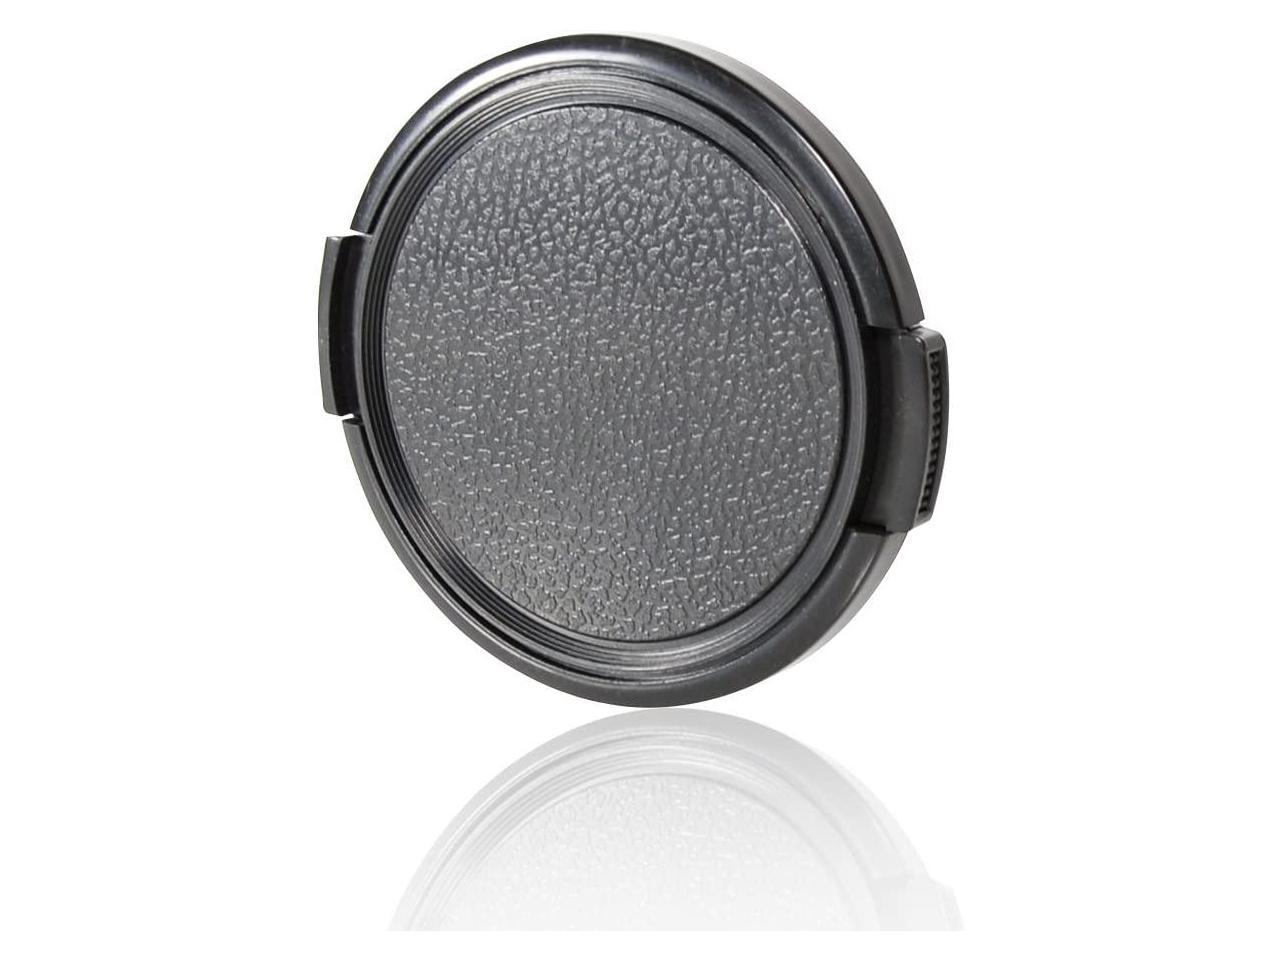 CamDesign 77MM Sides Pinch Snap-On Front Lens Cap/Cover Compatible with Canon Sony Nikon Pentax All DSLR Lenses